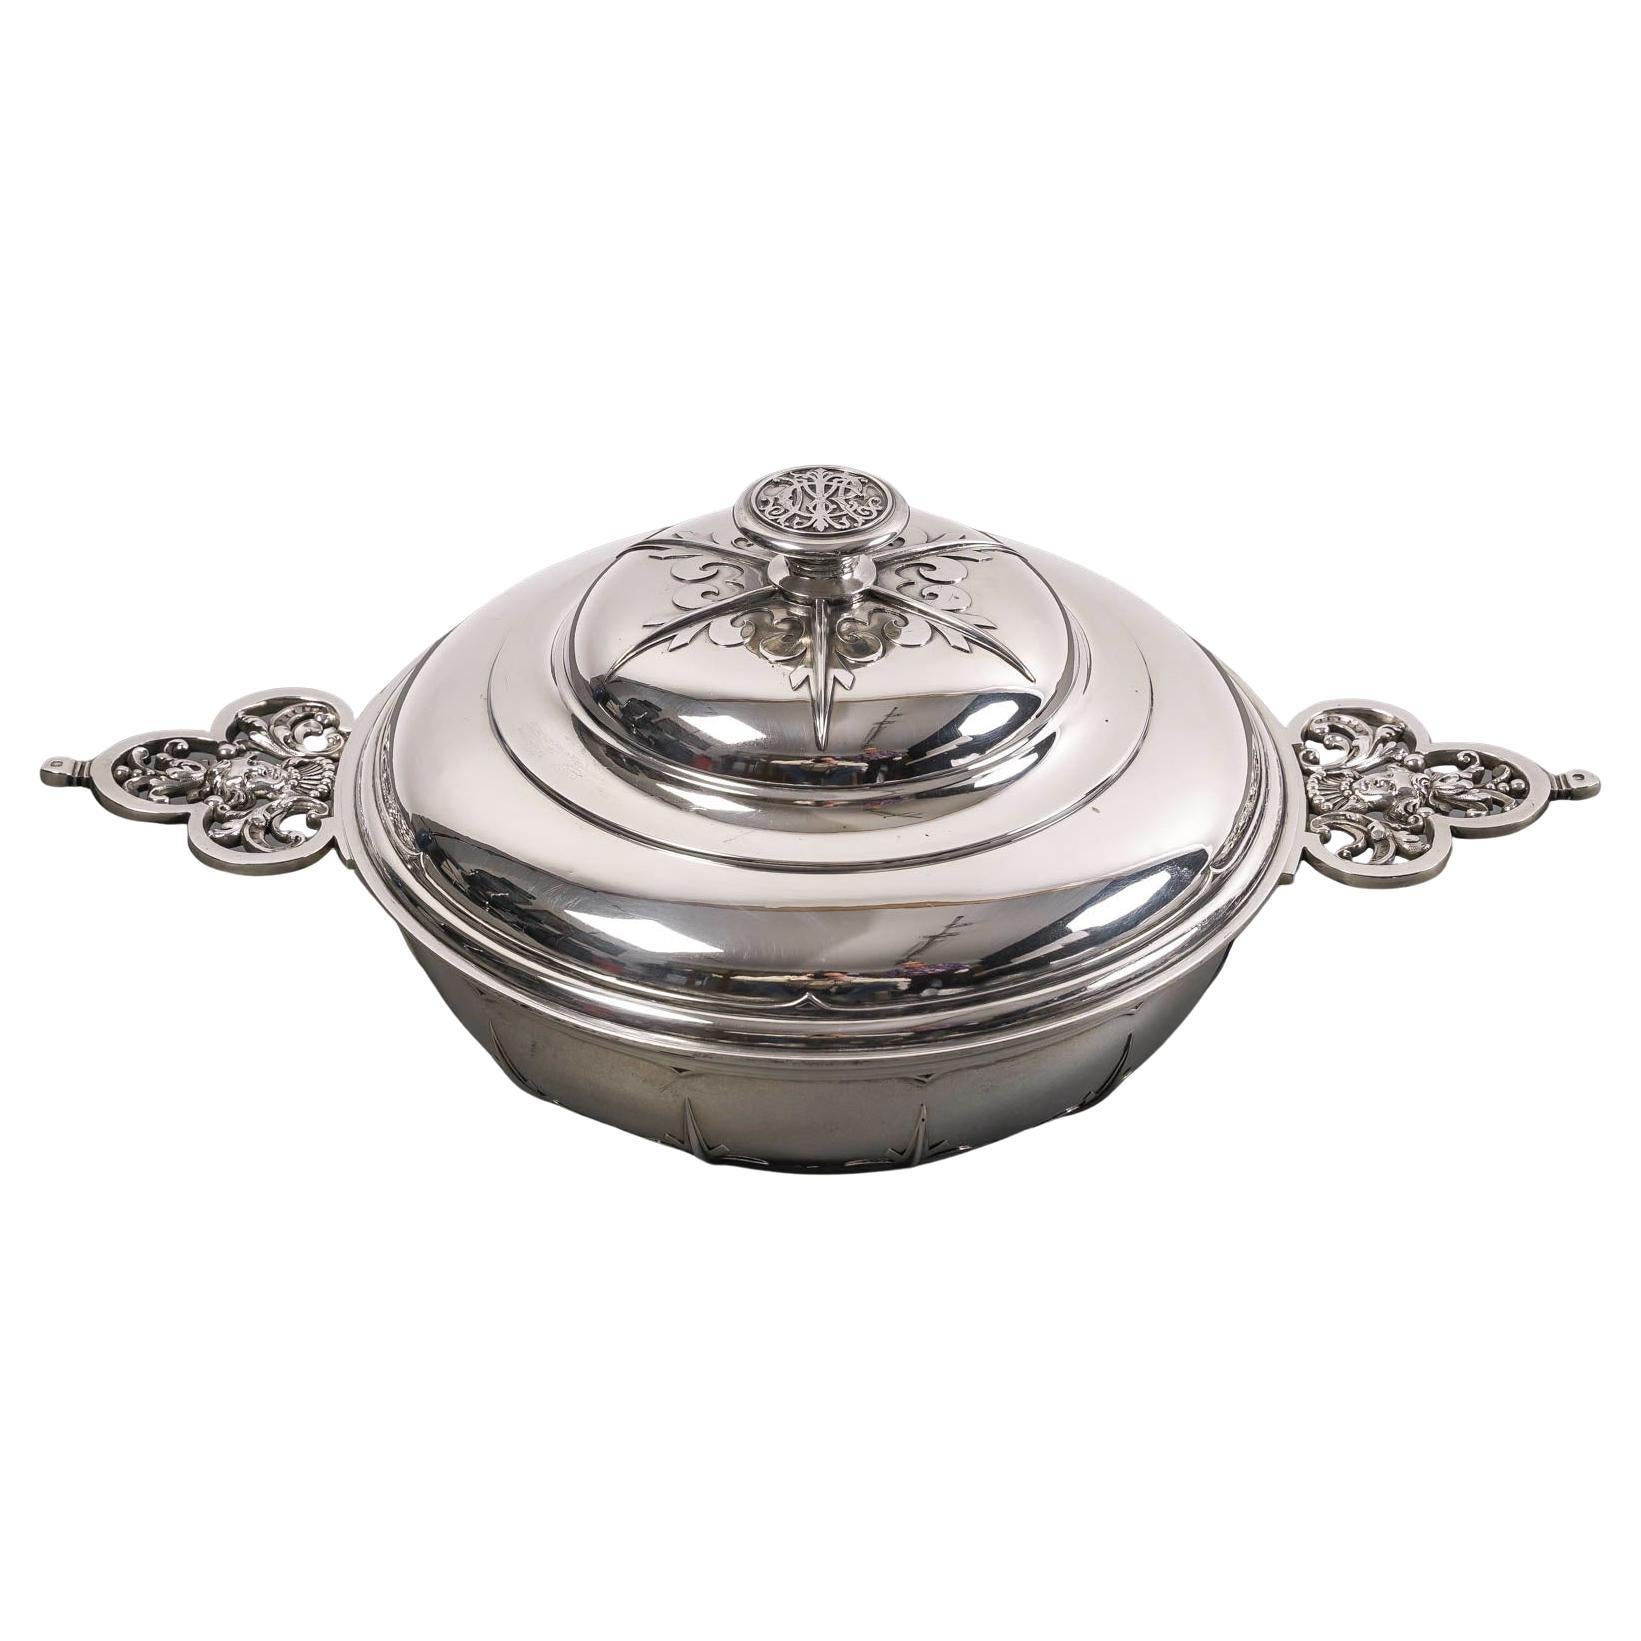 Goldsmith Cardeilhac - Covered Vegetable Dish In Solid Silver Mascaron Circa XIX